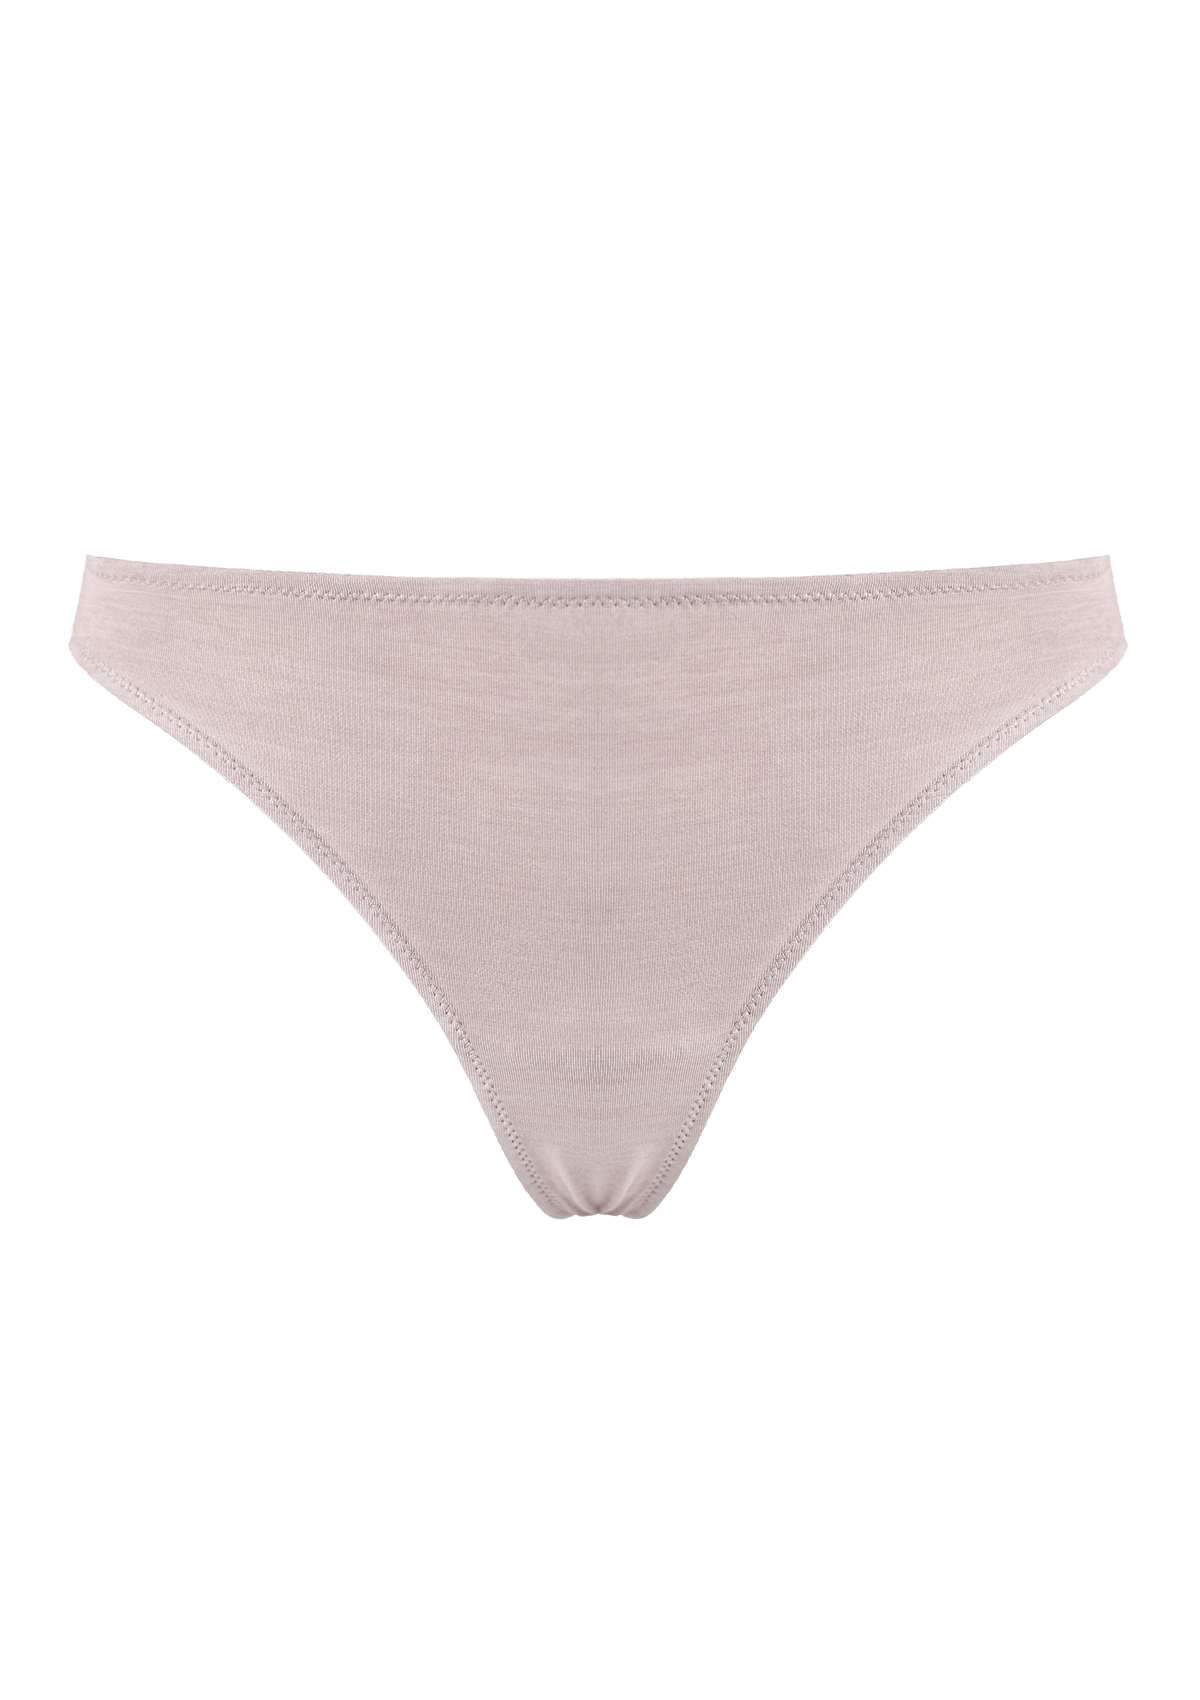 HSIA Comfort Cotton Thongs 3 Pack - M / Beige+Black+Pink